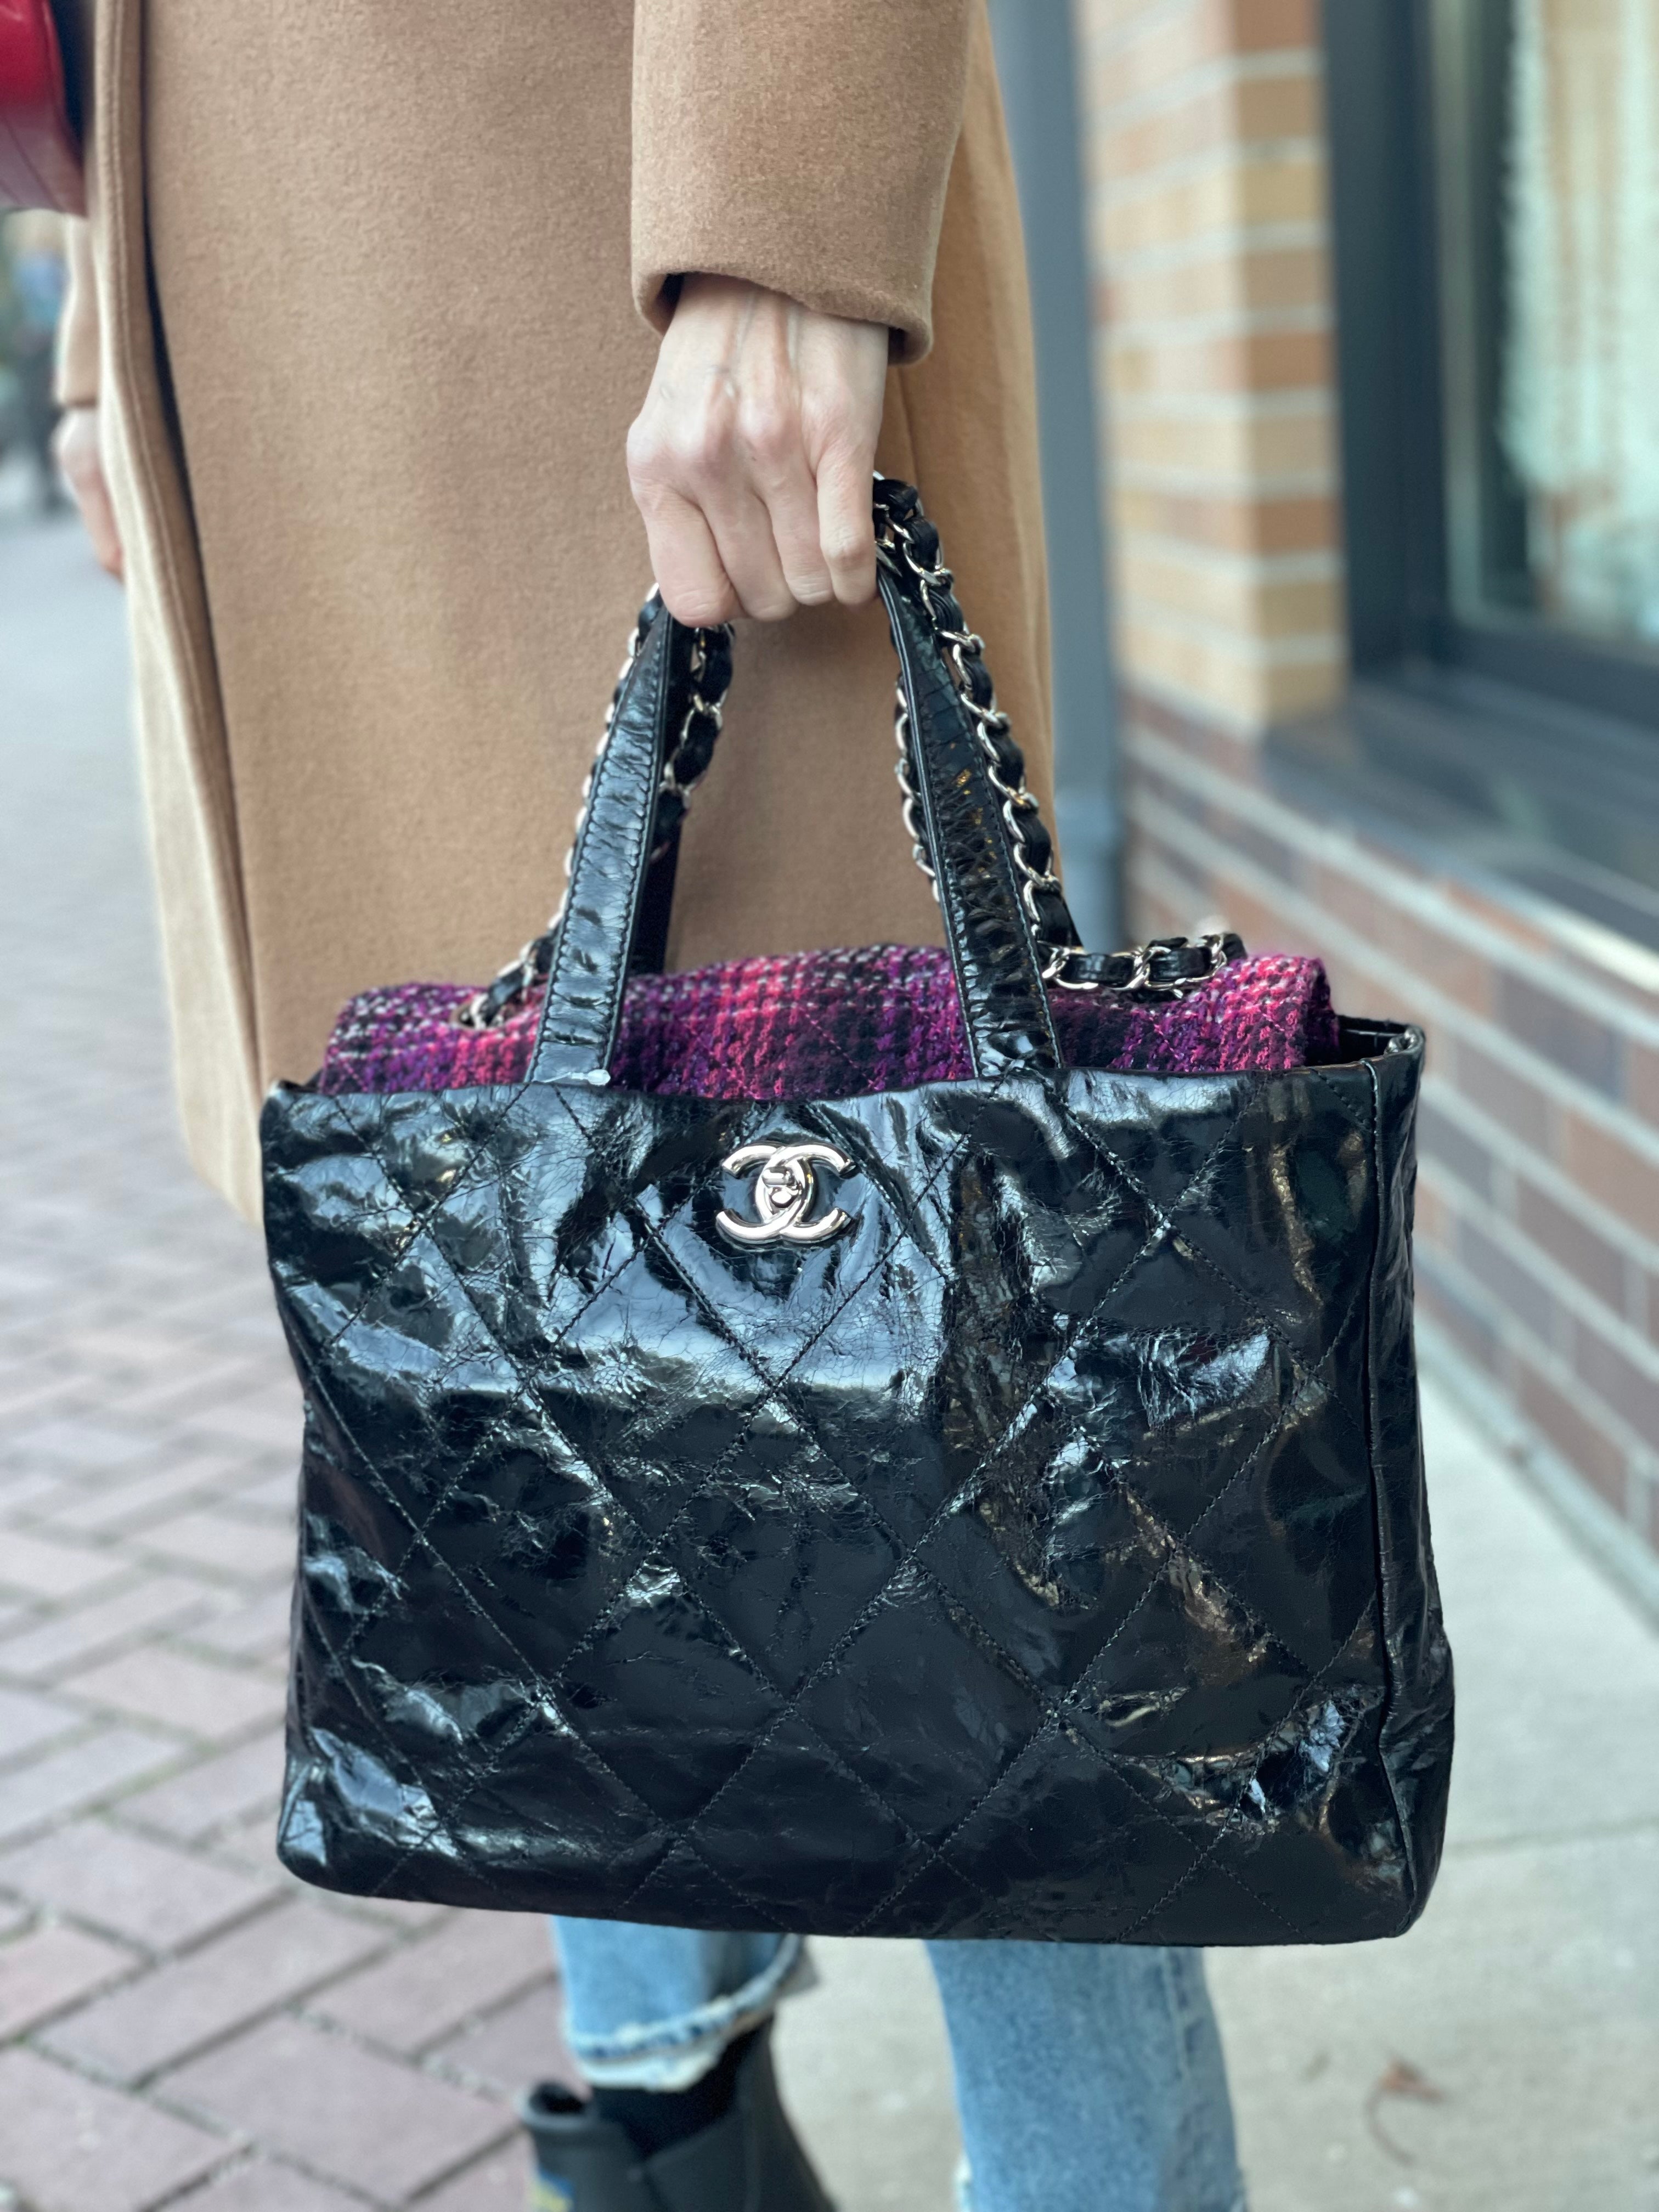 Review: CHANEL LARGE DEAUVILLE TOTE / SHOPPING TOTE 